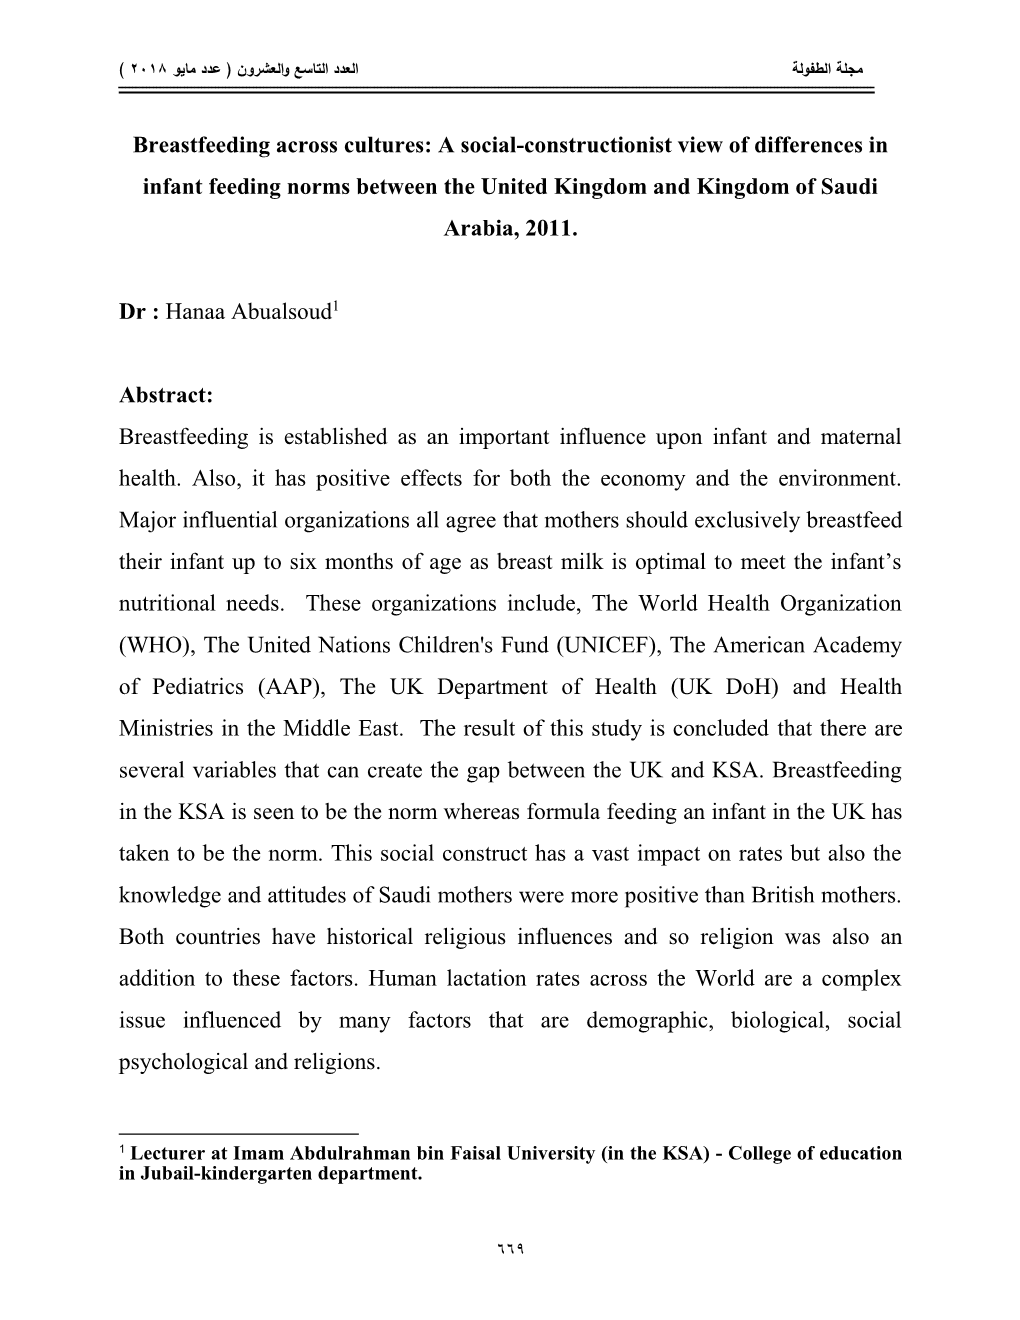 Breastfeeding Across Cultures: a Social-Constructionist View of Differences in Infant Feeding Norms Between the United Kingdom and Kingdom of Saudi Arabia, 2011